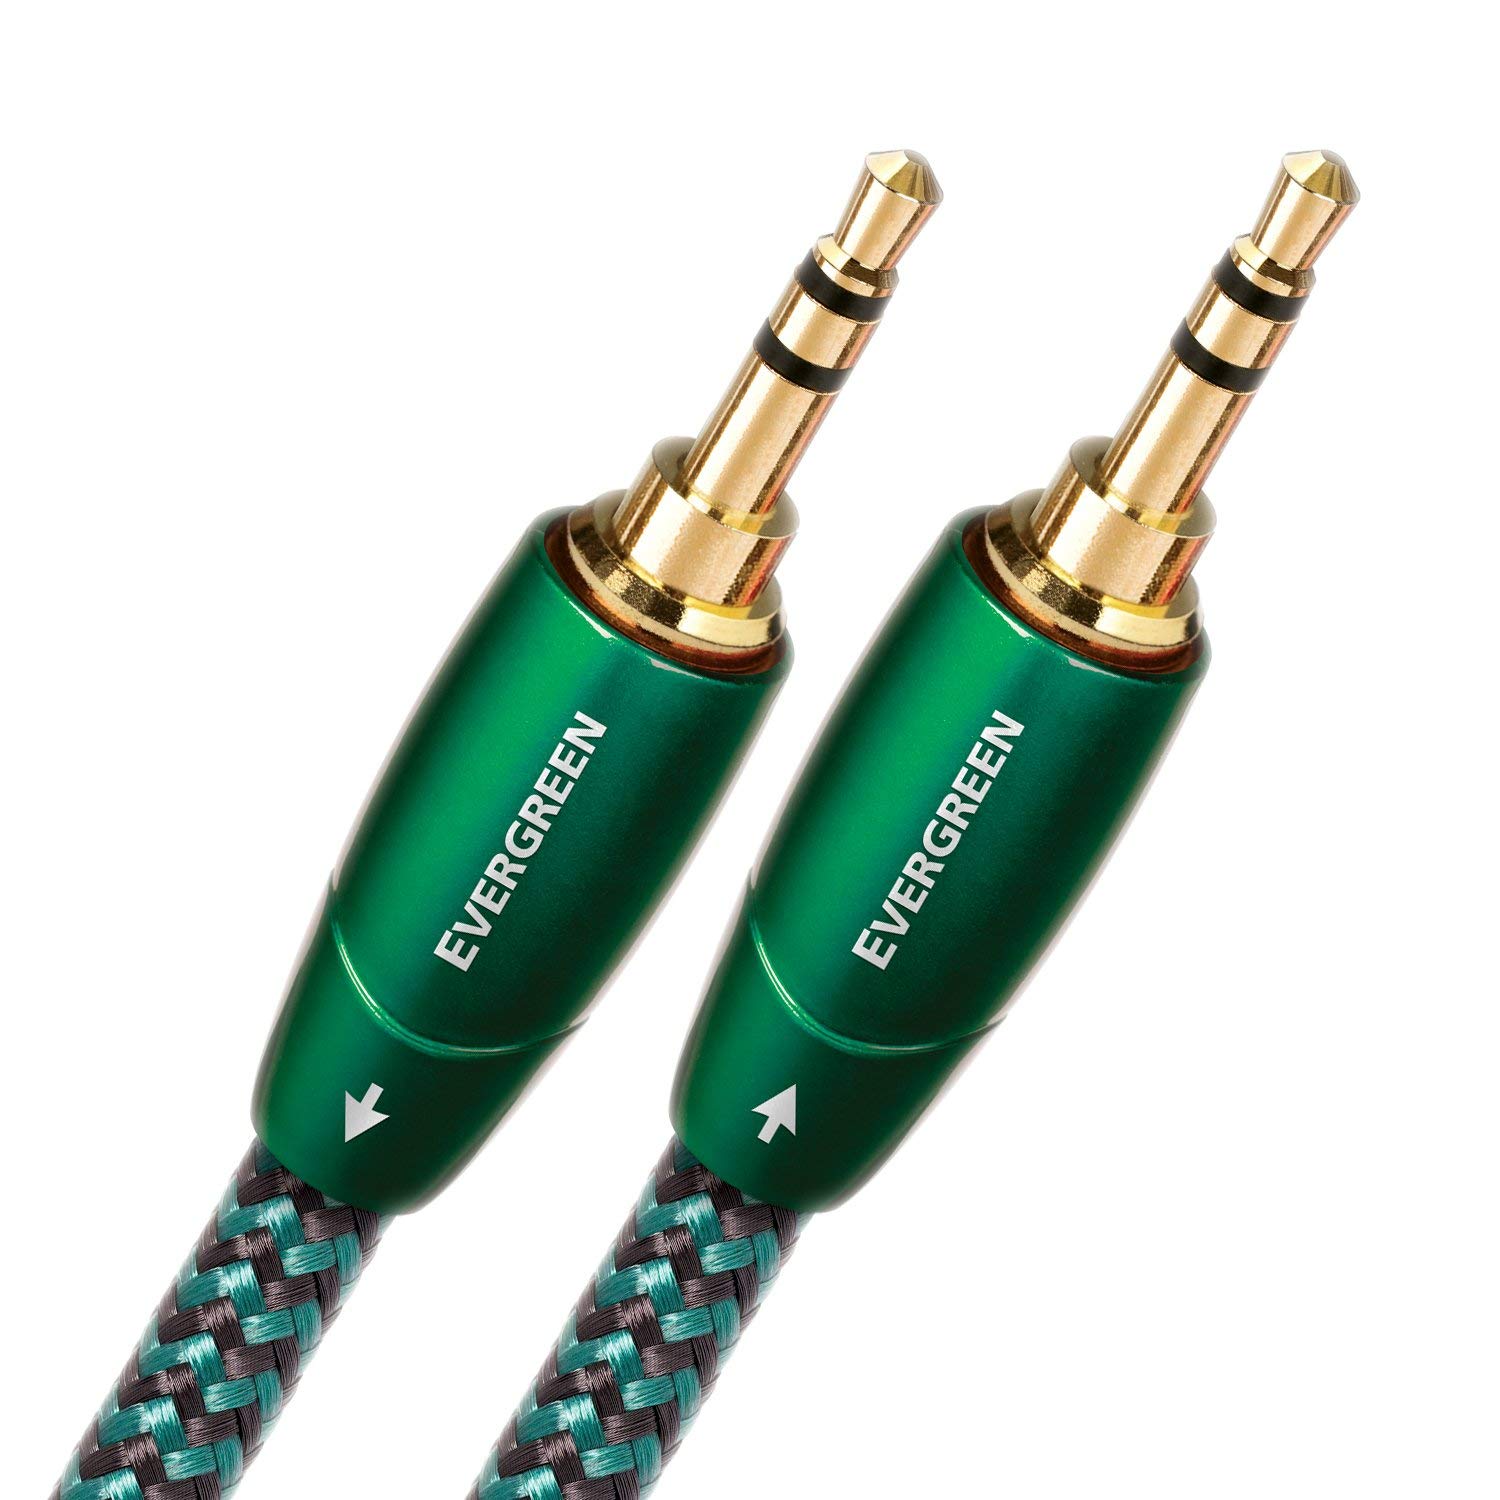 Audioquest Evergreen Audio Interconnect 1.0m (3 feet 4 inches) 3.5mm to 3.5mm - (Open Box)